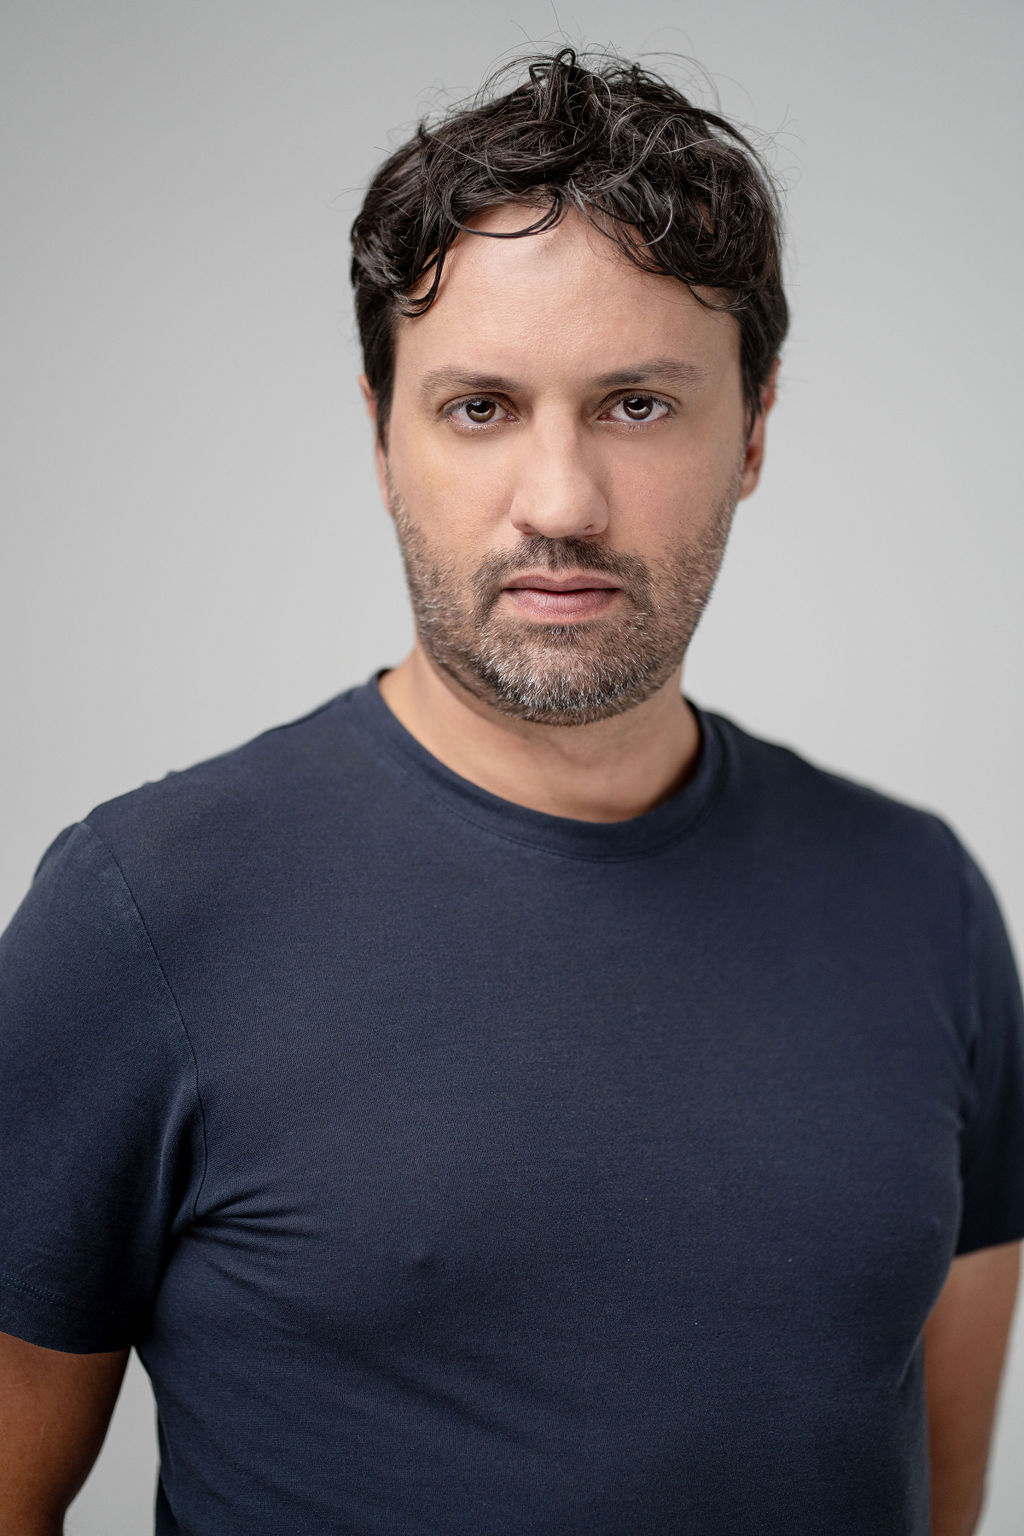 Paolo Mangiola, Artistic Director of ZfinMalta National Dance Company